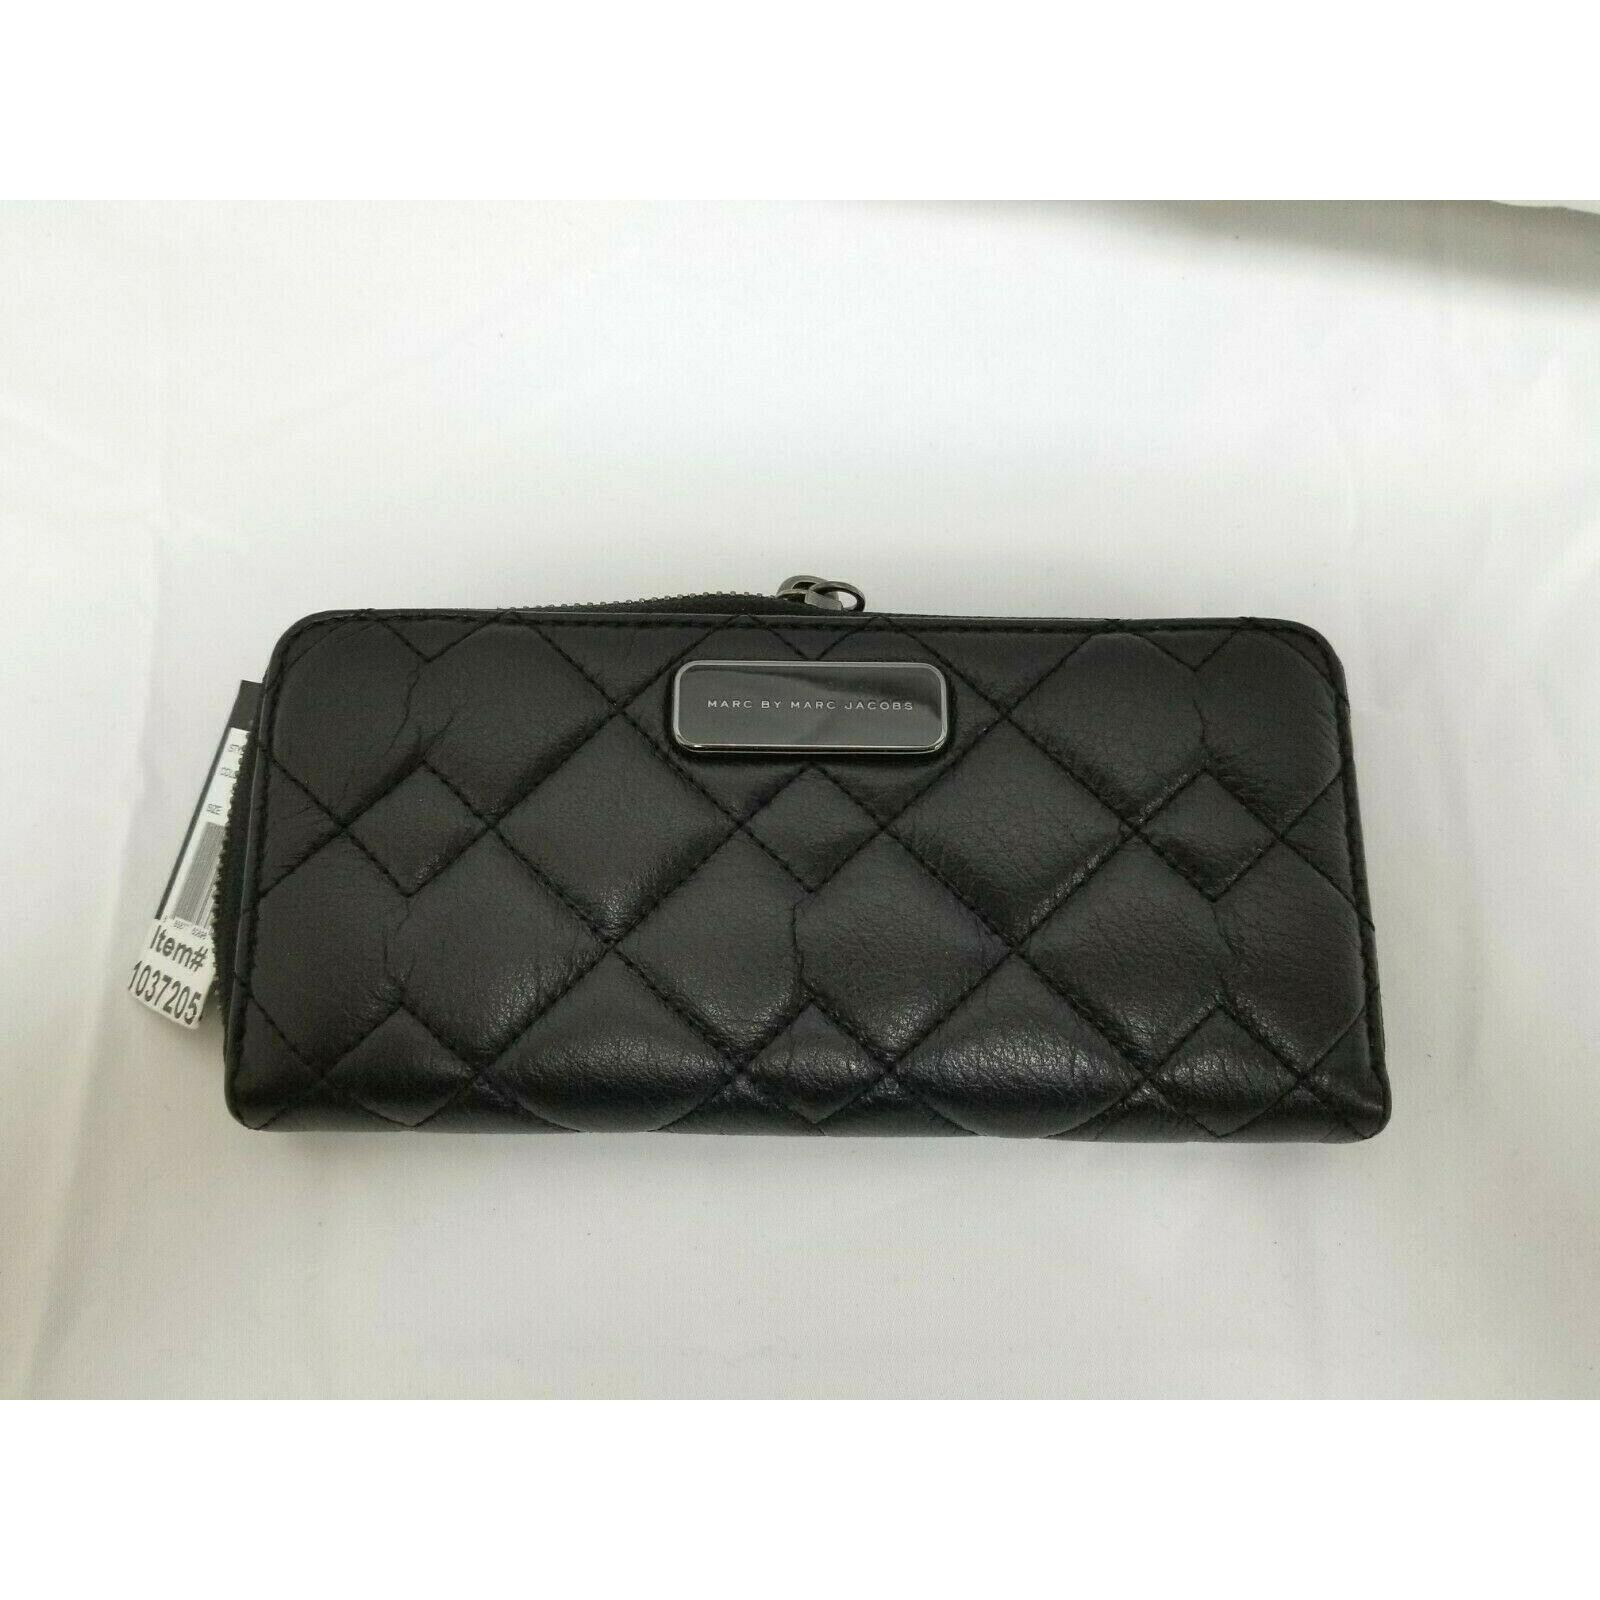 Marc by Marc Jacobs Sophisticato Crosby Quilted Leather Slim Zip Around Wallet